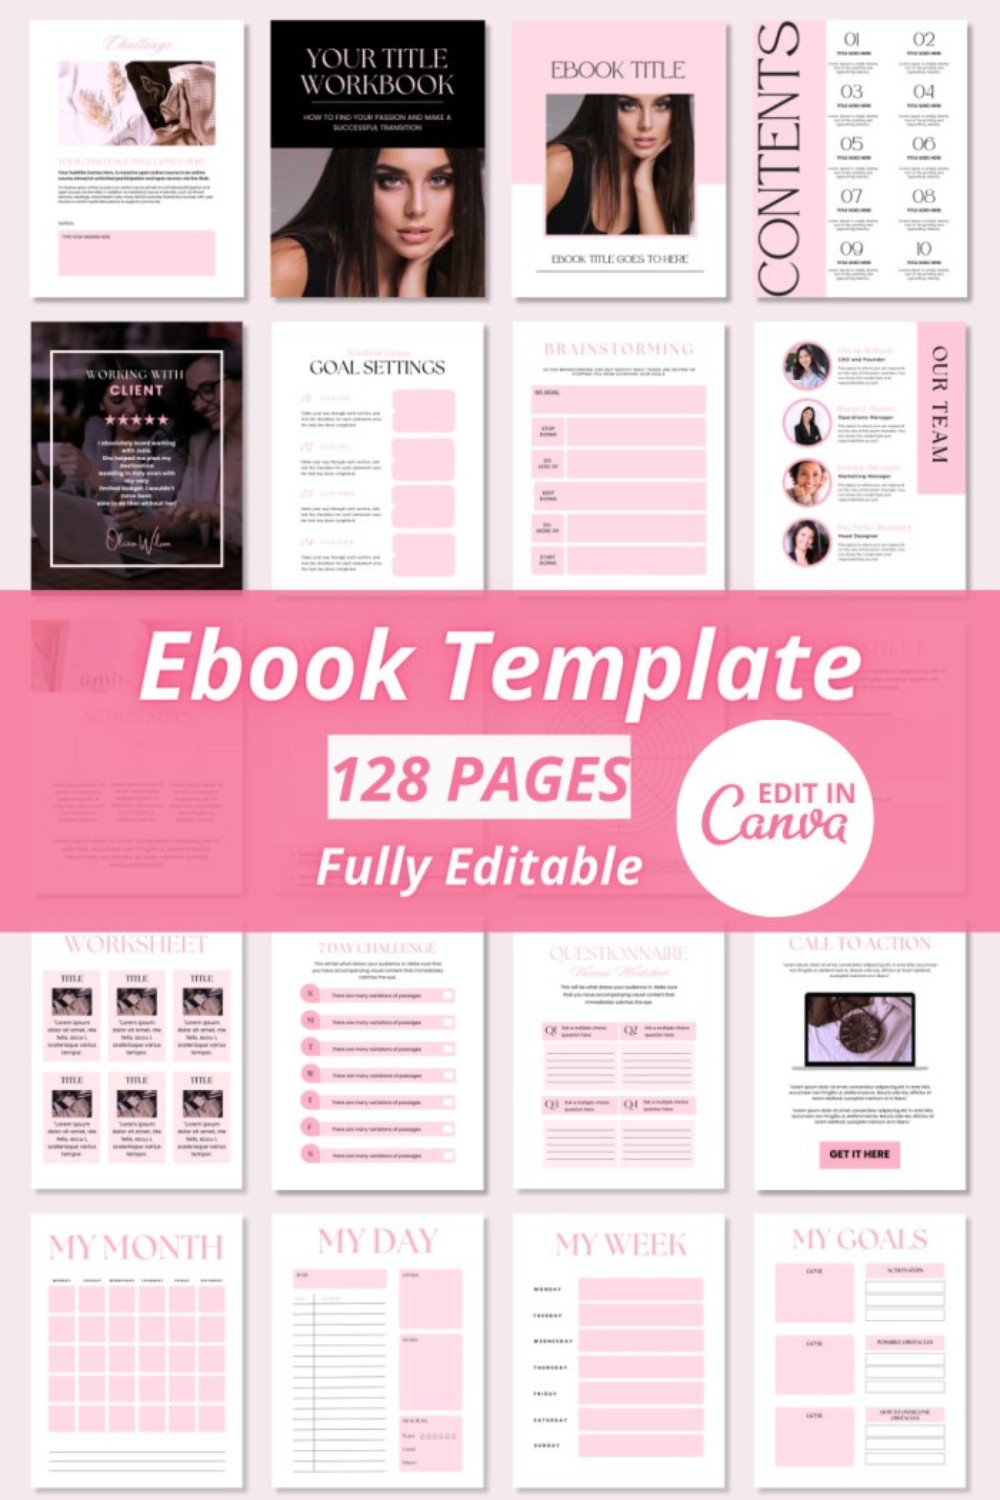 Ebook Template Canva | Coaching Guide Book Canva Template| Lead Magnet Ebook | Course Creator Template | Modern Workbook | Coaching Workbook | Worksheet eBook, Coaches, Bloggers, Opt In, Charts, Checklists, Planners, Webinar, Challenges Template | pinterest preview image.